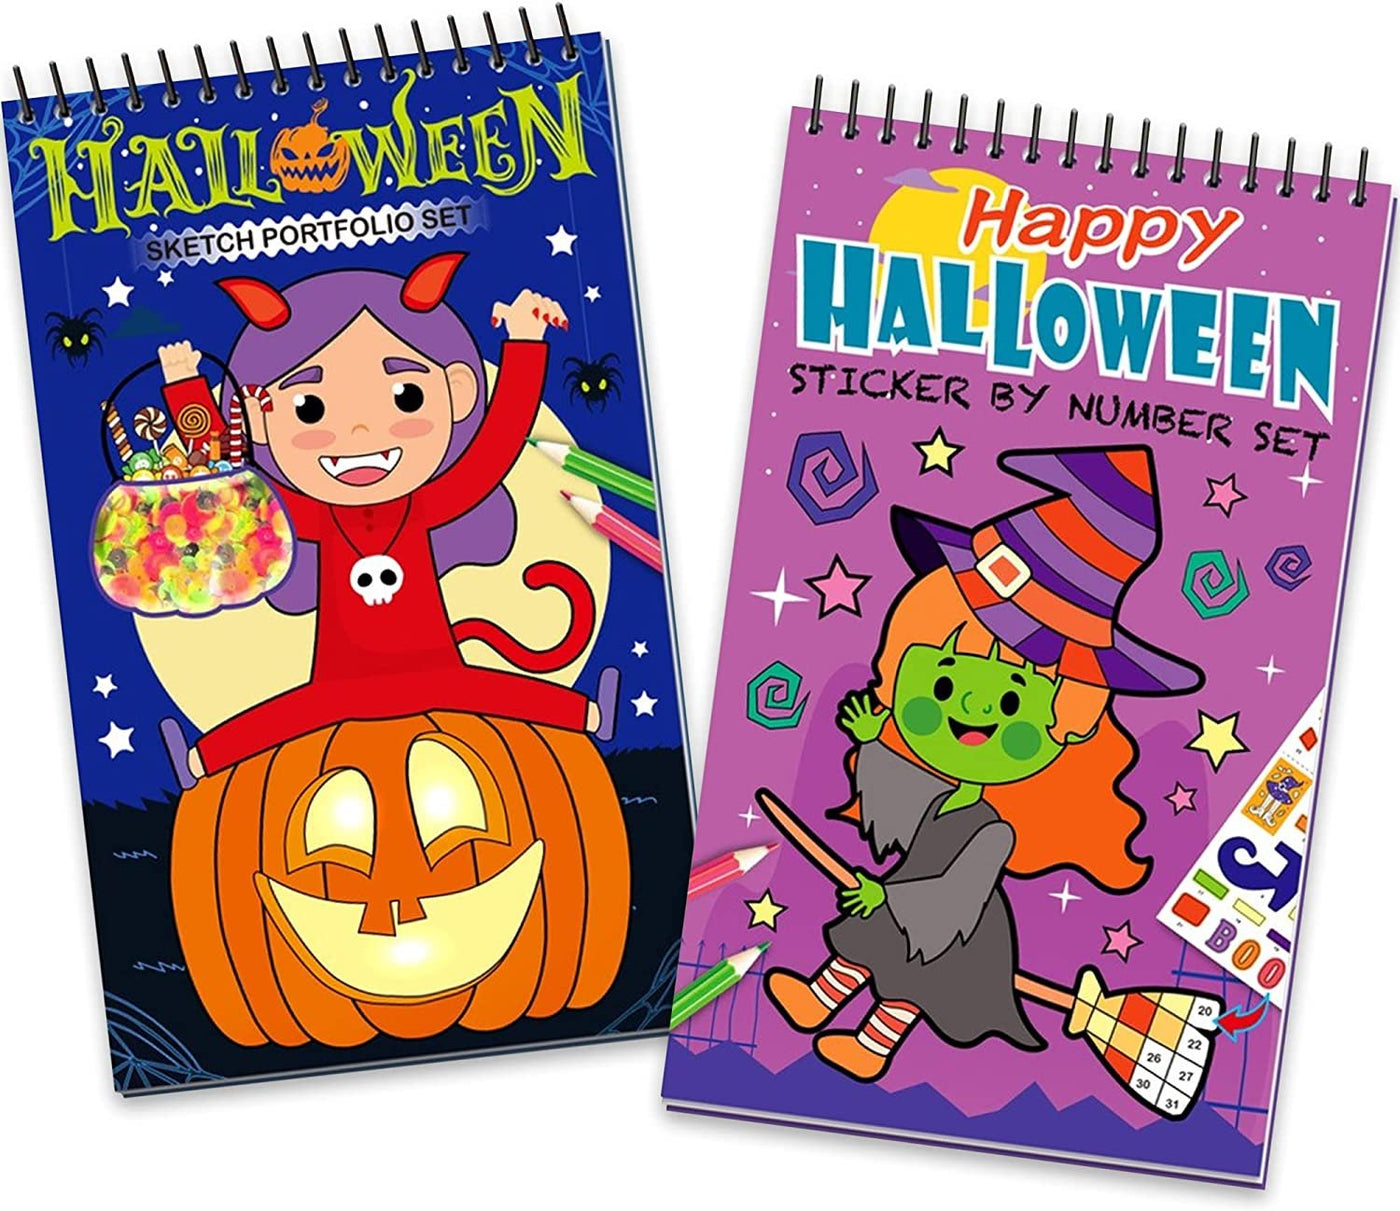 ArtCreativity Halloween Activity Books, Set of 2, Includes 1 Coloring Book with a Sticker Sheet and 1 Sticker by Number Book with 5 Sticker Sheets, Great as Halloween Party Favors and Treats